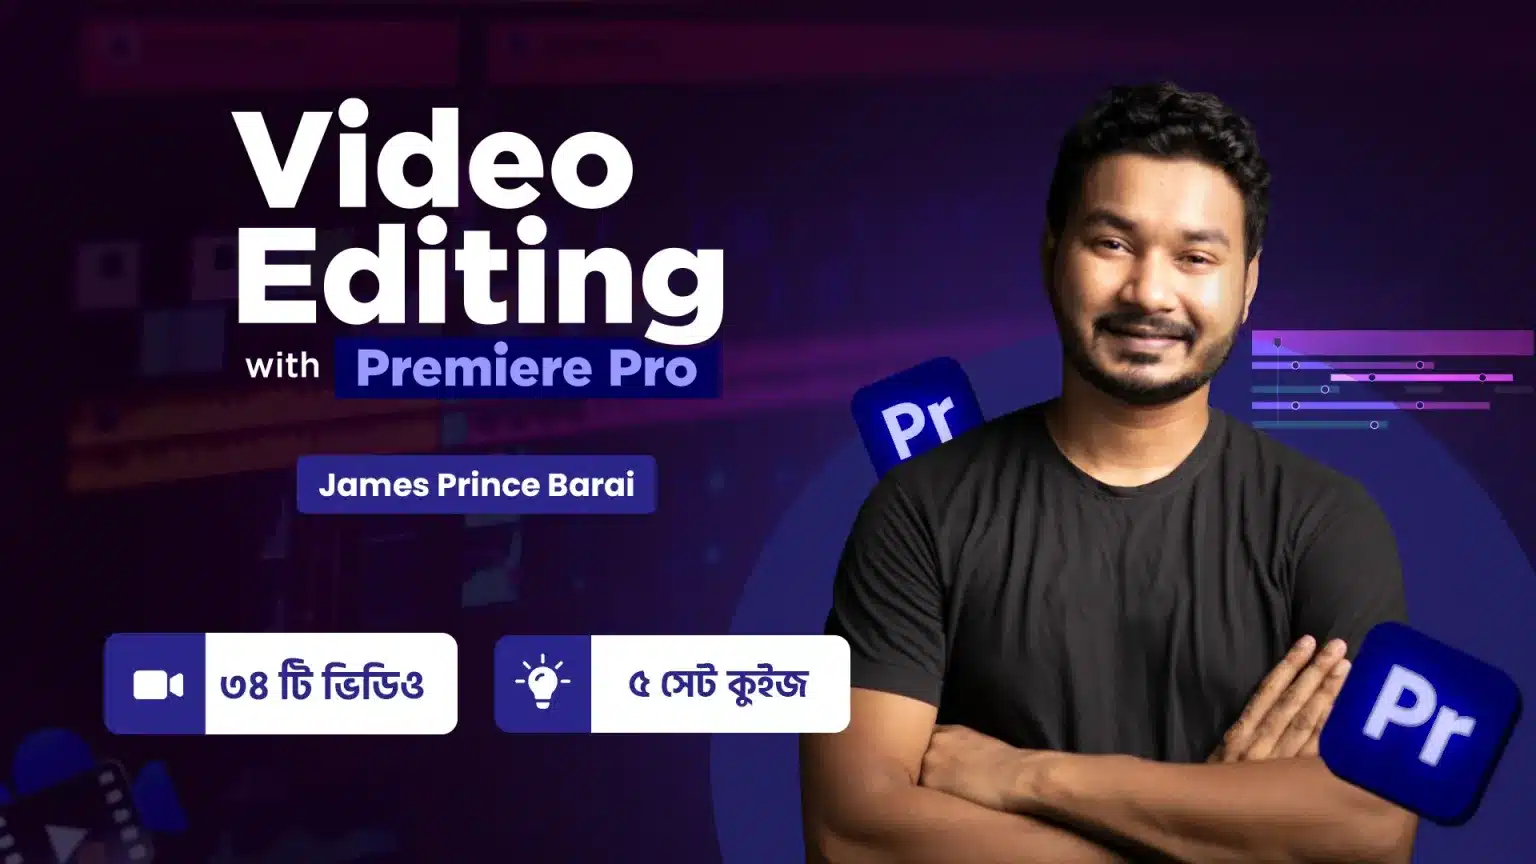 10 Minute School Video Editing Course